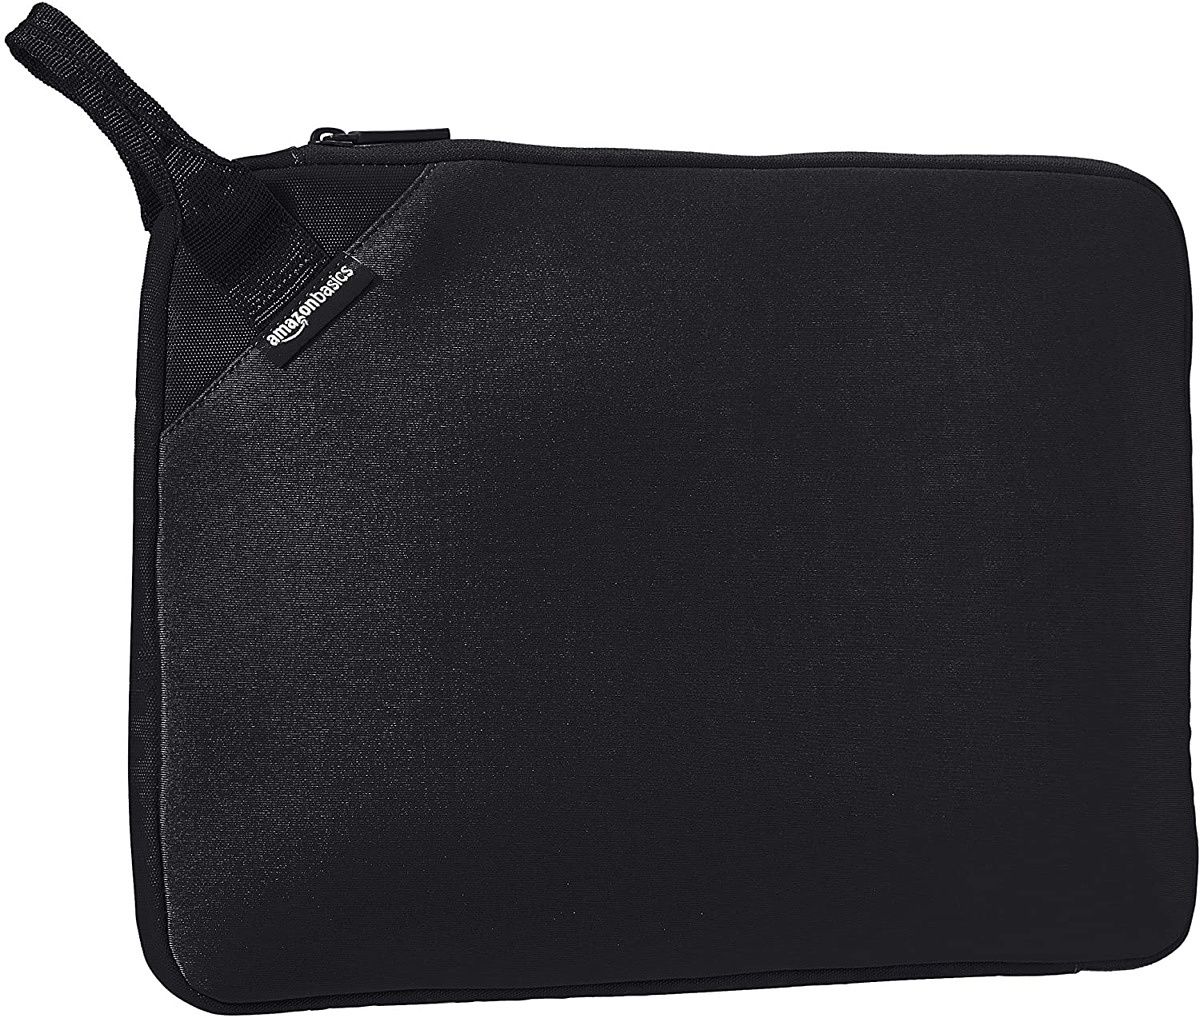 Basic is exactly what you get with this laptop sleeve from Amazon Basics. It comes in a couple of colors and has a small handle you can use to more easily carry your laptop around. There aren't any bells or whistles to this one, but it's cheap.